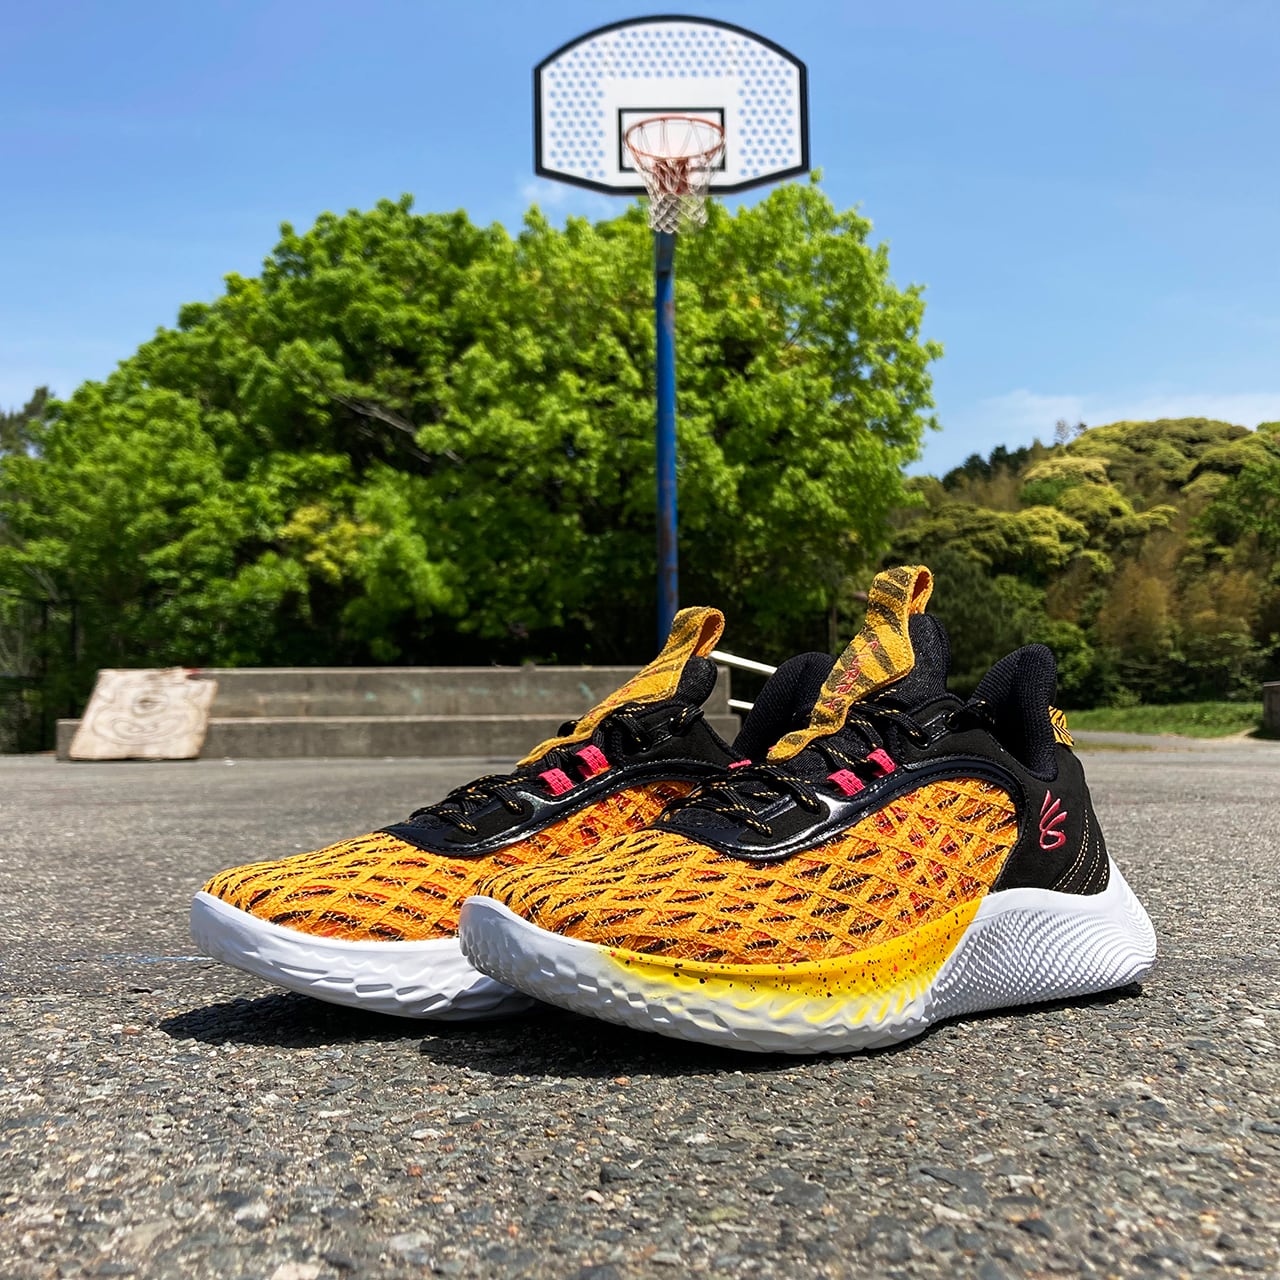 Under Armour Curry Flow 9 "Beyond The Stripe" アンダーアーマー